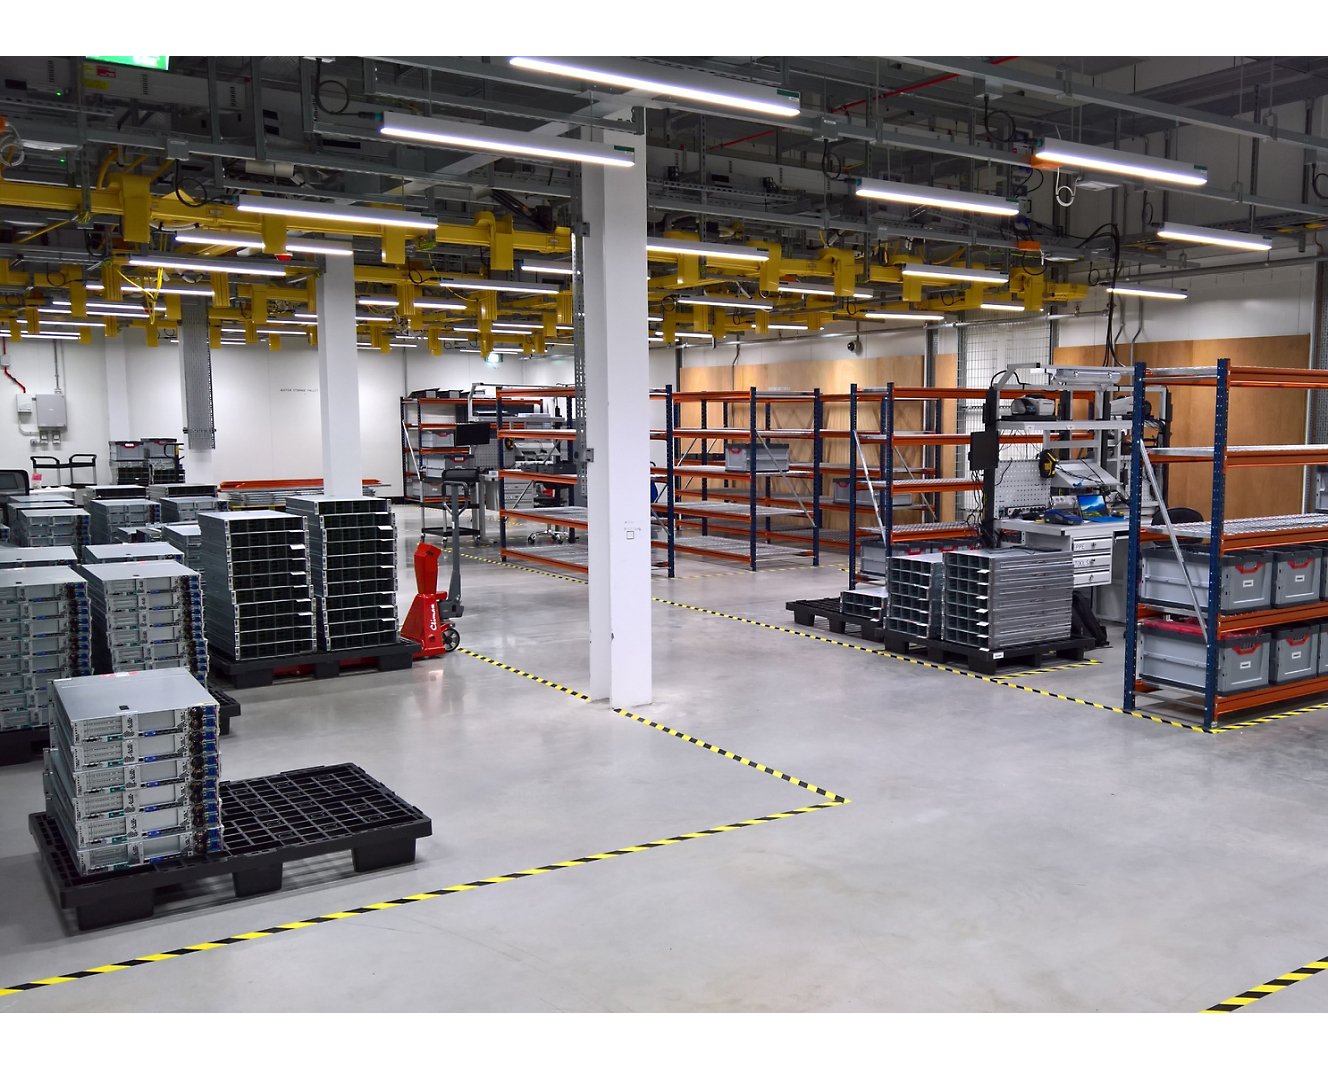 A large warehouse with many racks and shelves.